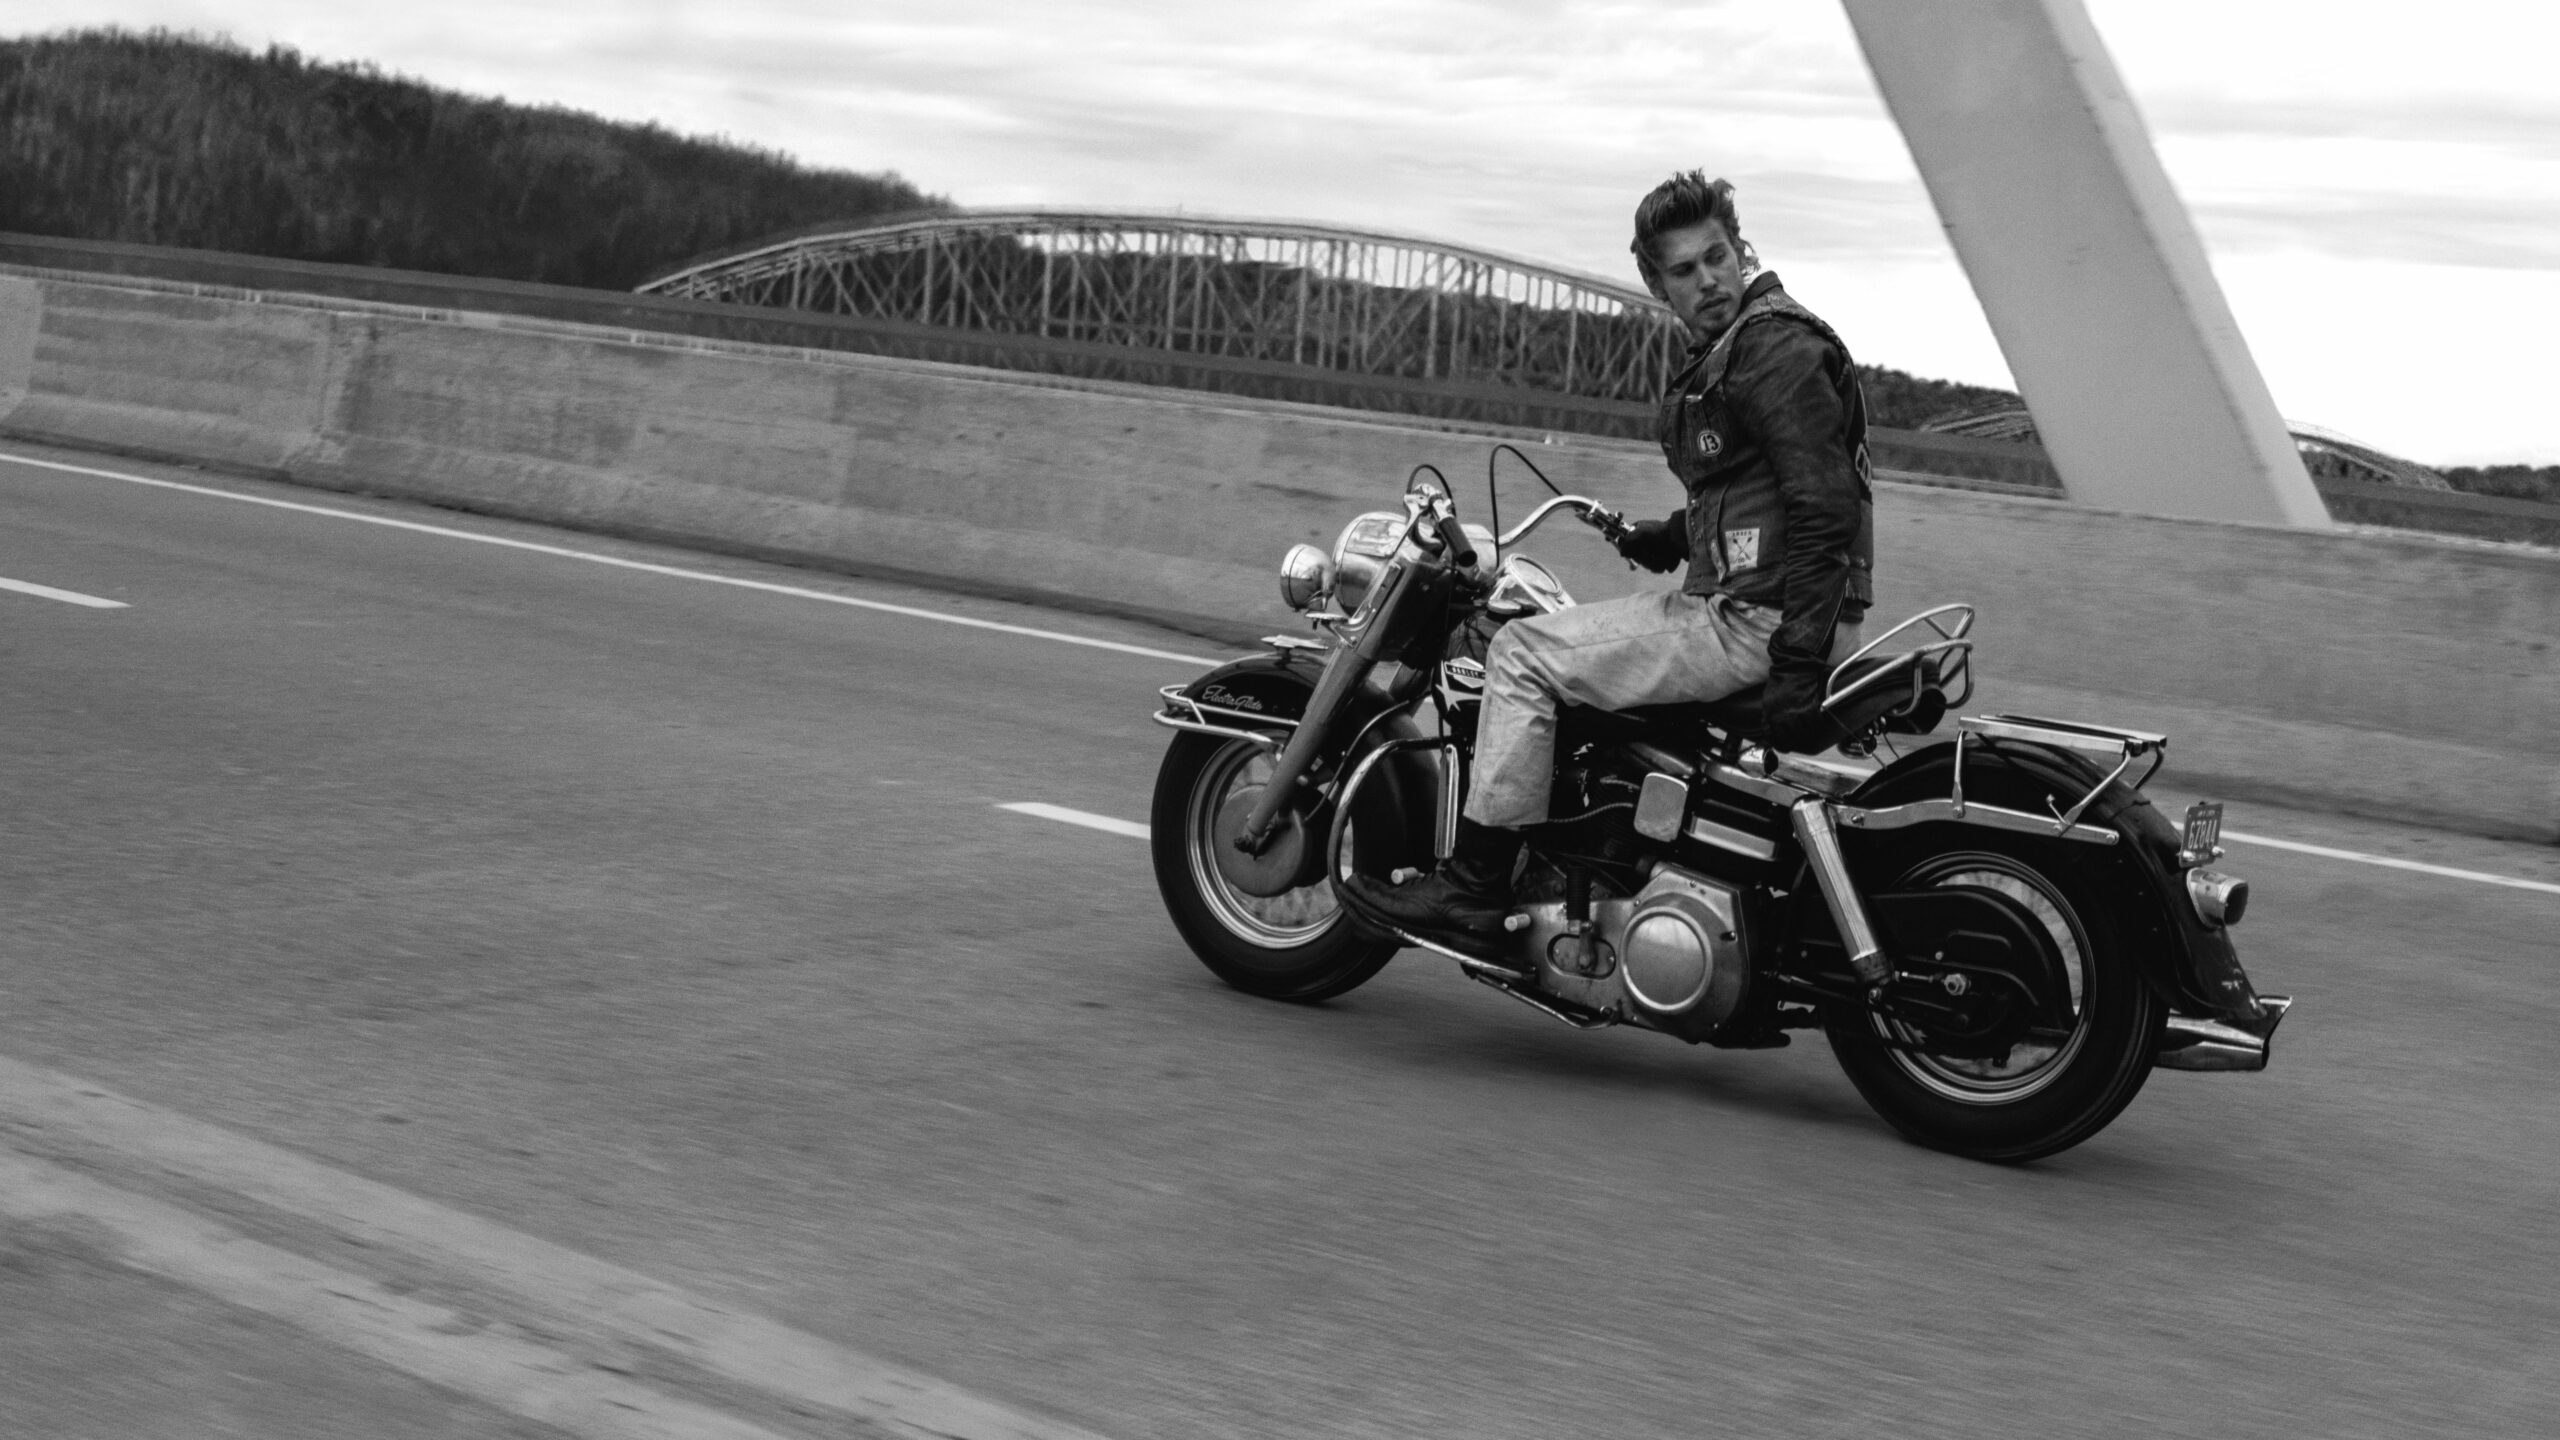 The Bikeriders Brings Danny Lyon&#8217;s Gripping Biker Photography to Life